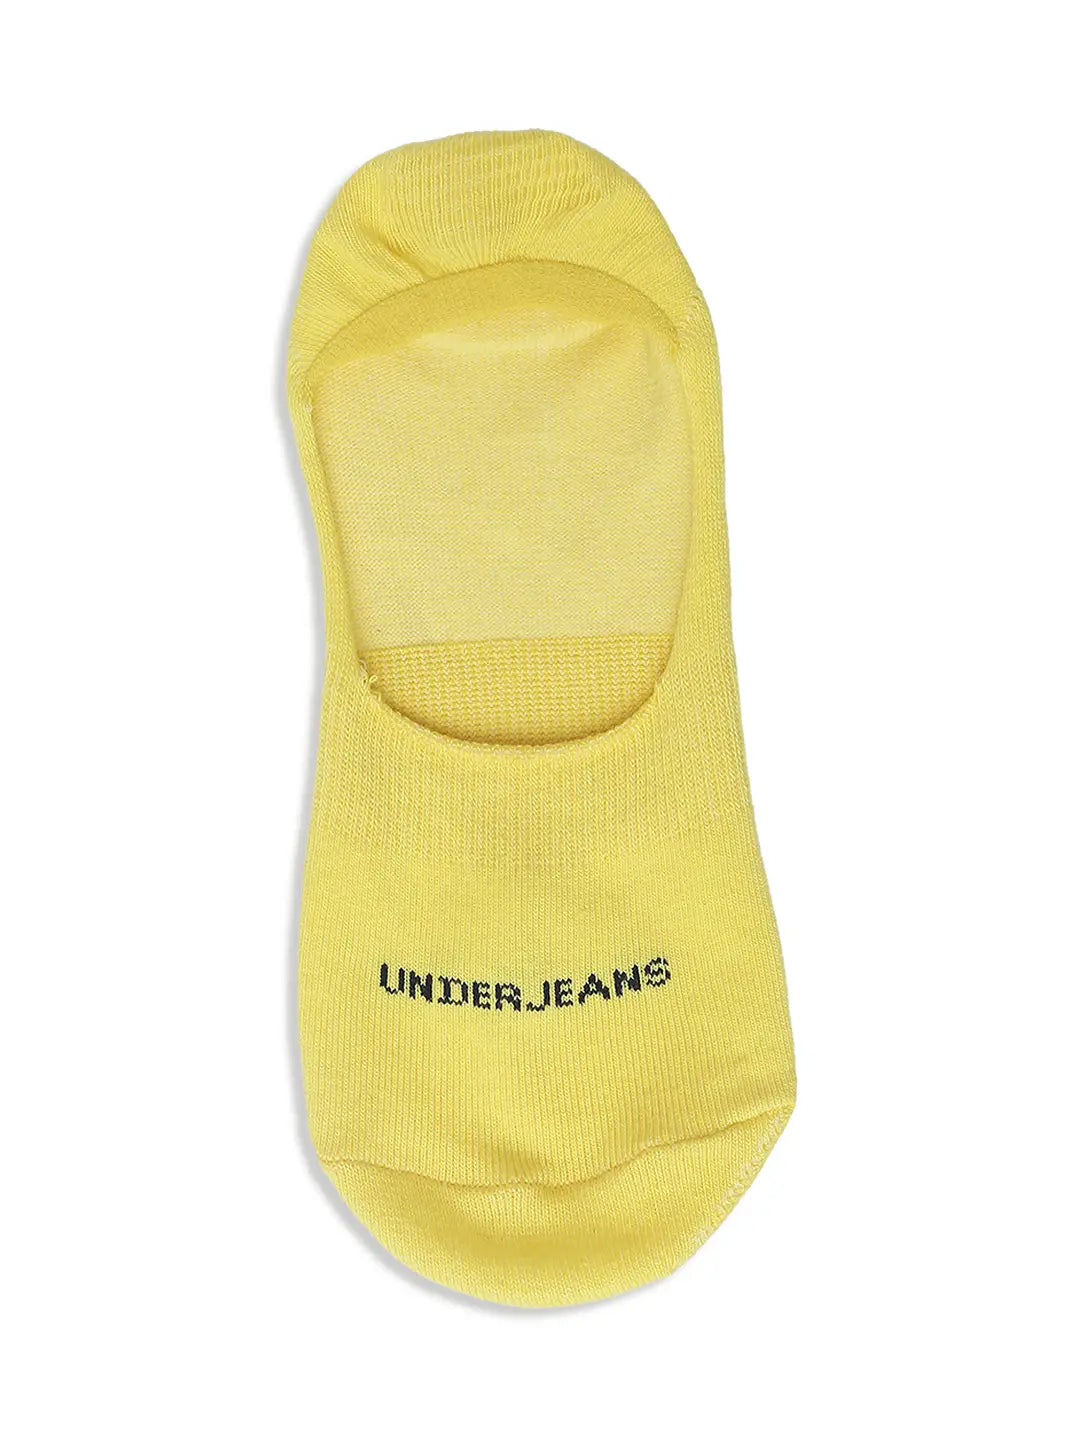 Men Yellow & Olive Cotton Blend No Show Socks - Pack Of 2 - Underjeans by Spykar